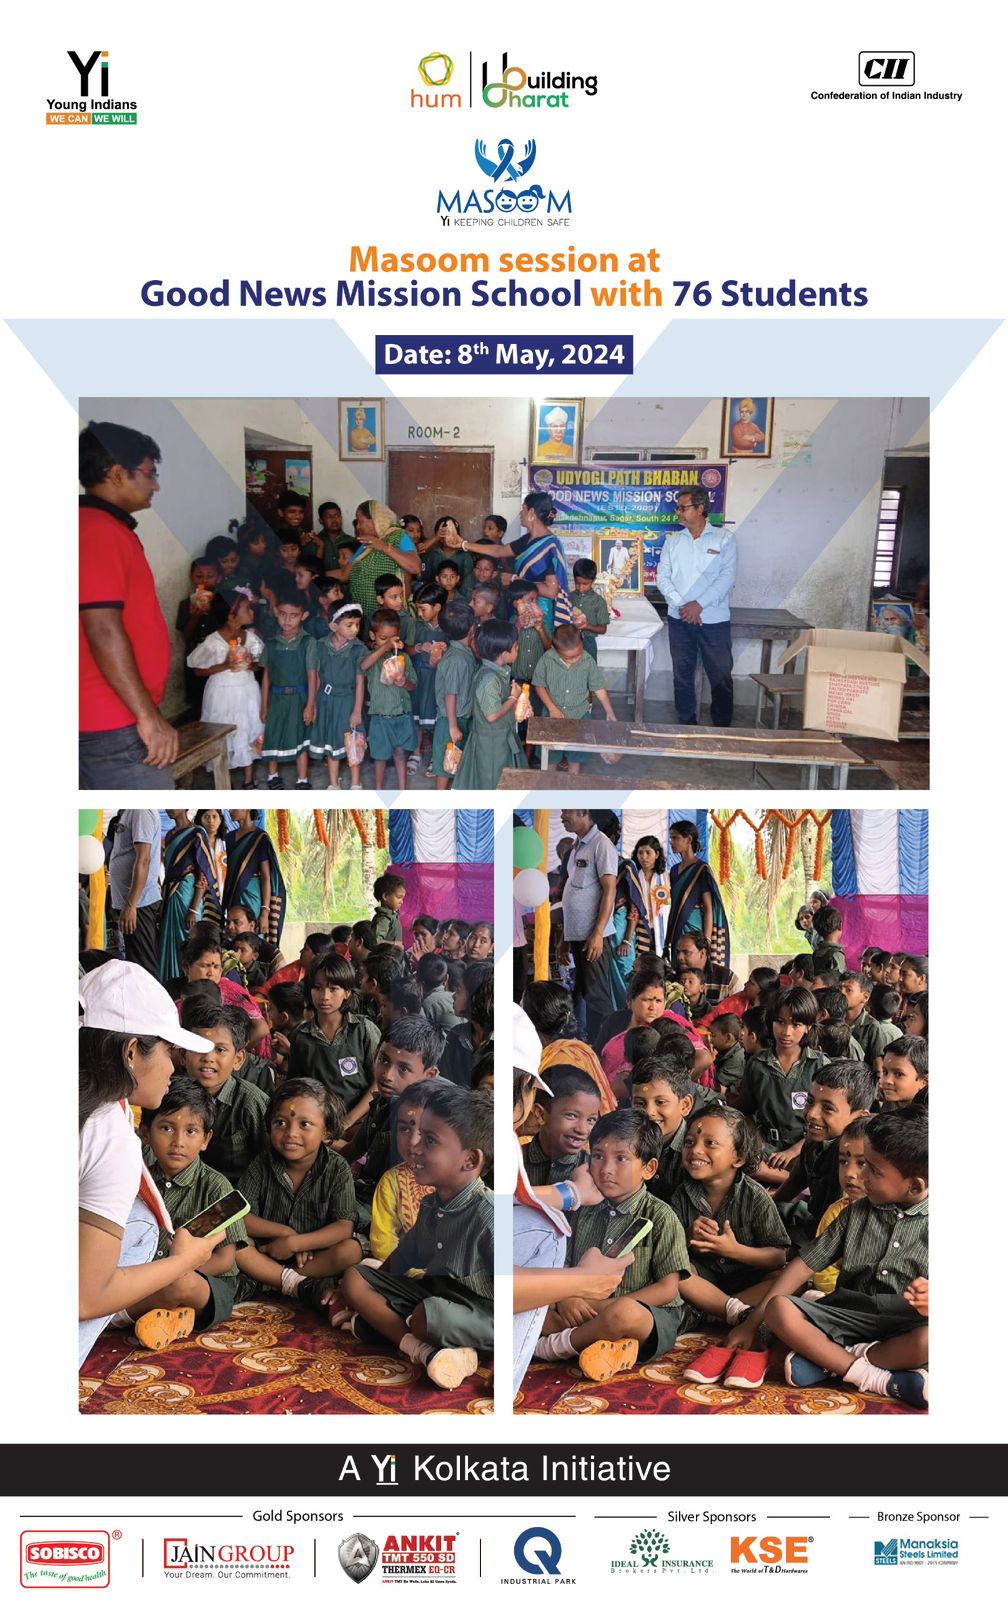 Yi24 | Masoom - Awareness Session at Good News Mission School with 76 Students